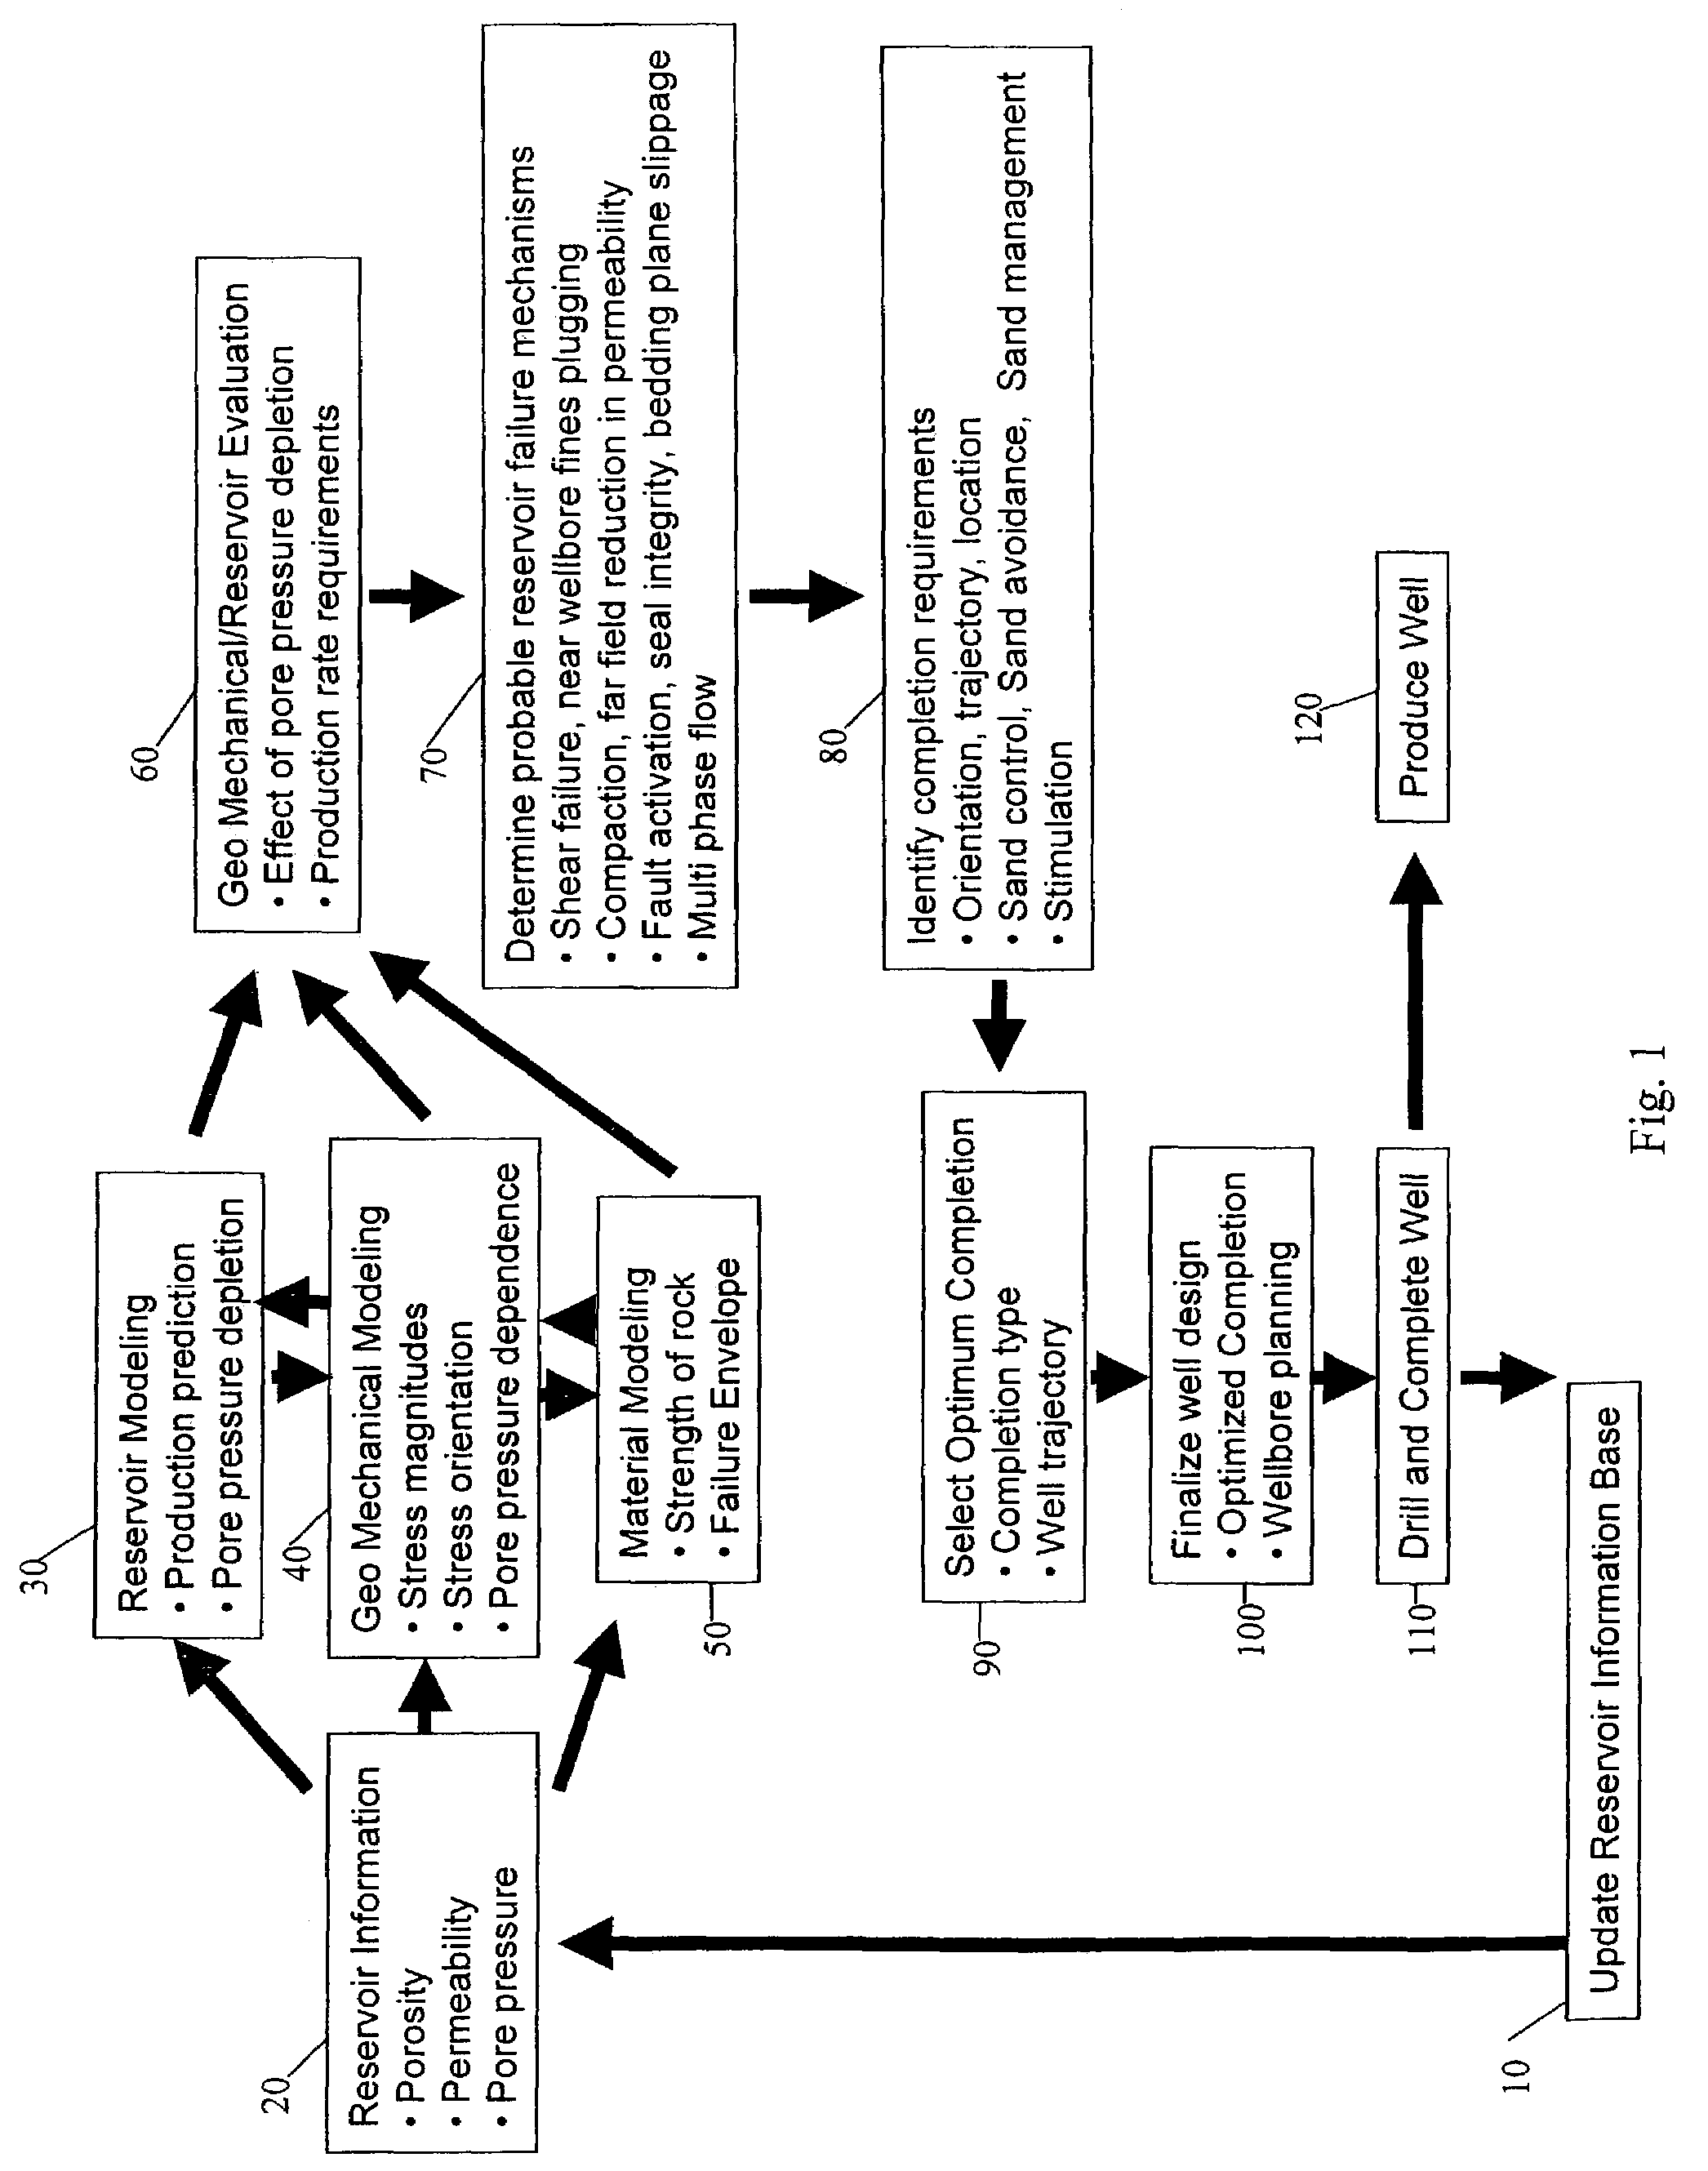 System and process for optimal selection of hydrocarbon well completion type and design